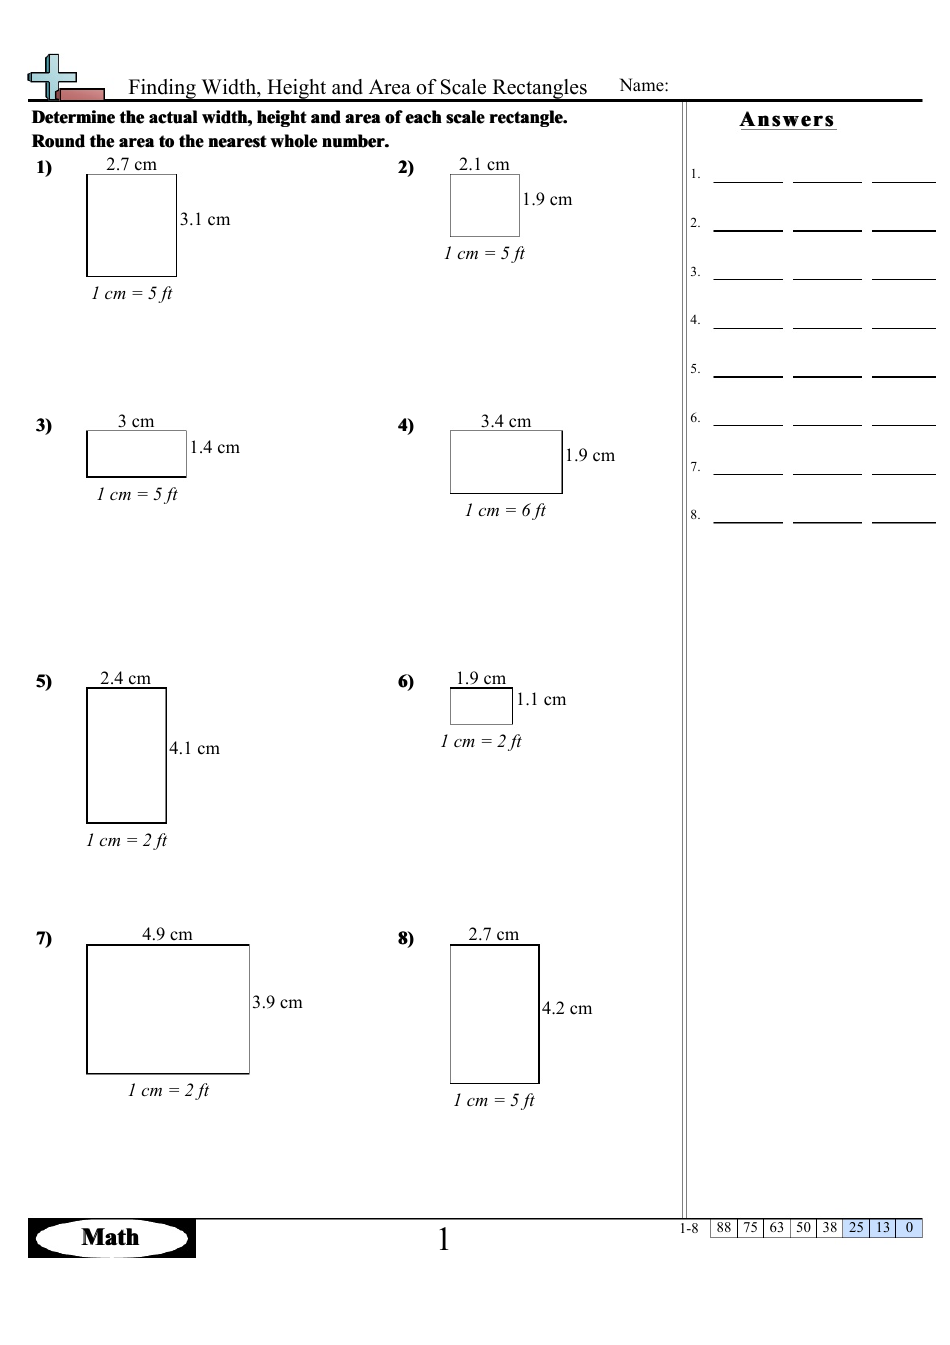 Finding Width, Height and Area of Scale Rectangles Math Worksheets With Answers, Page 1